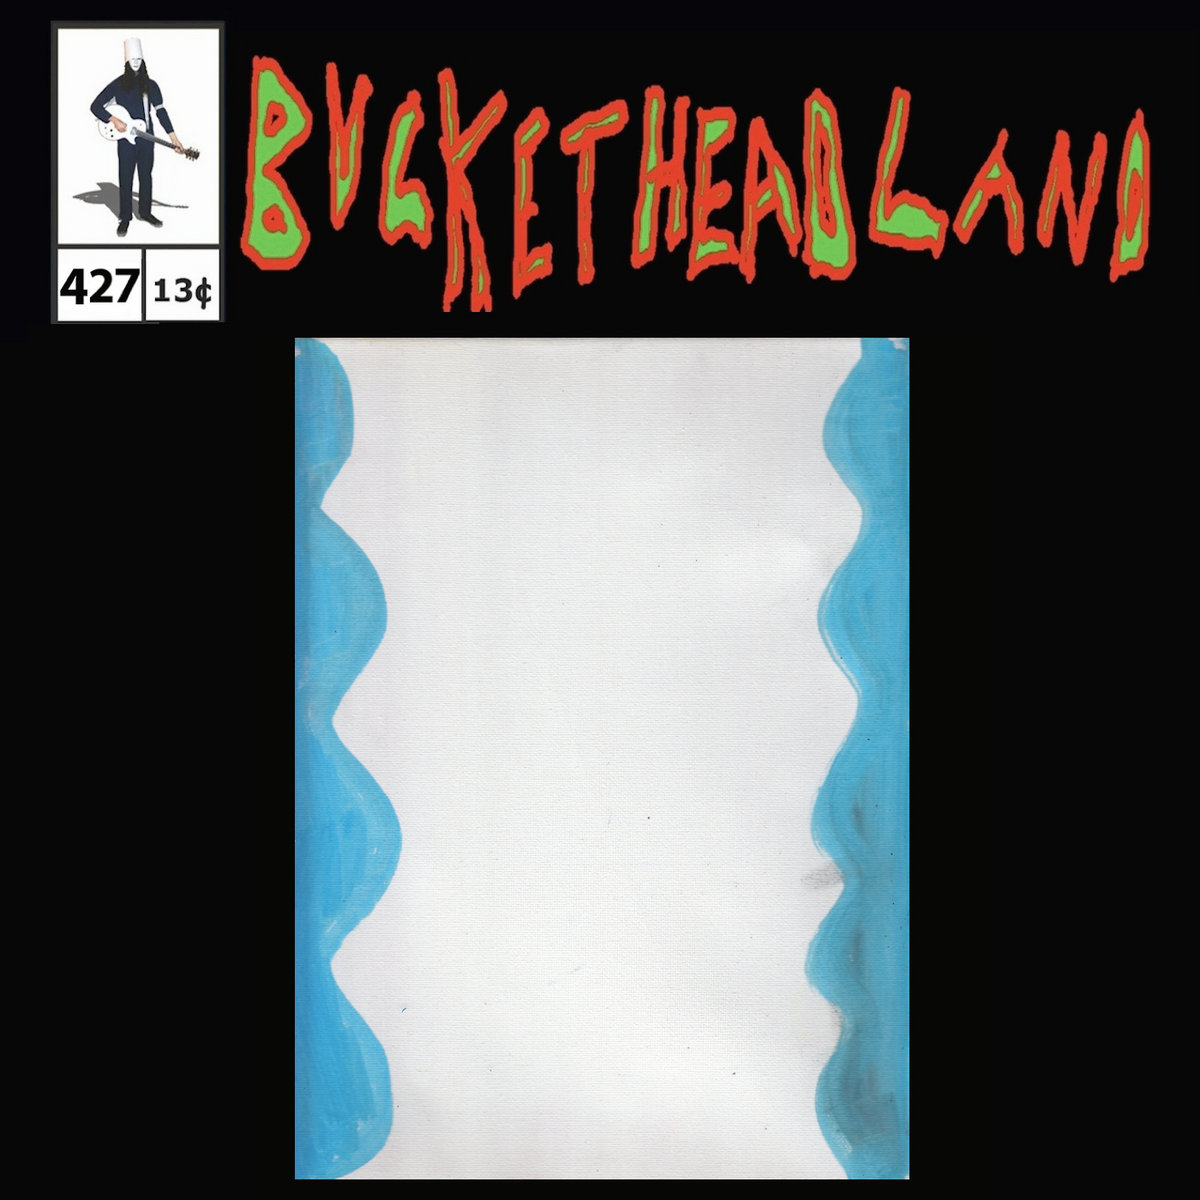 BUCKETHEAD - Pike 427 - The Waves Are Born cover 